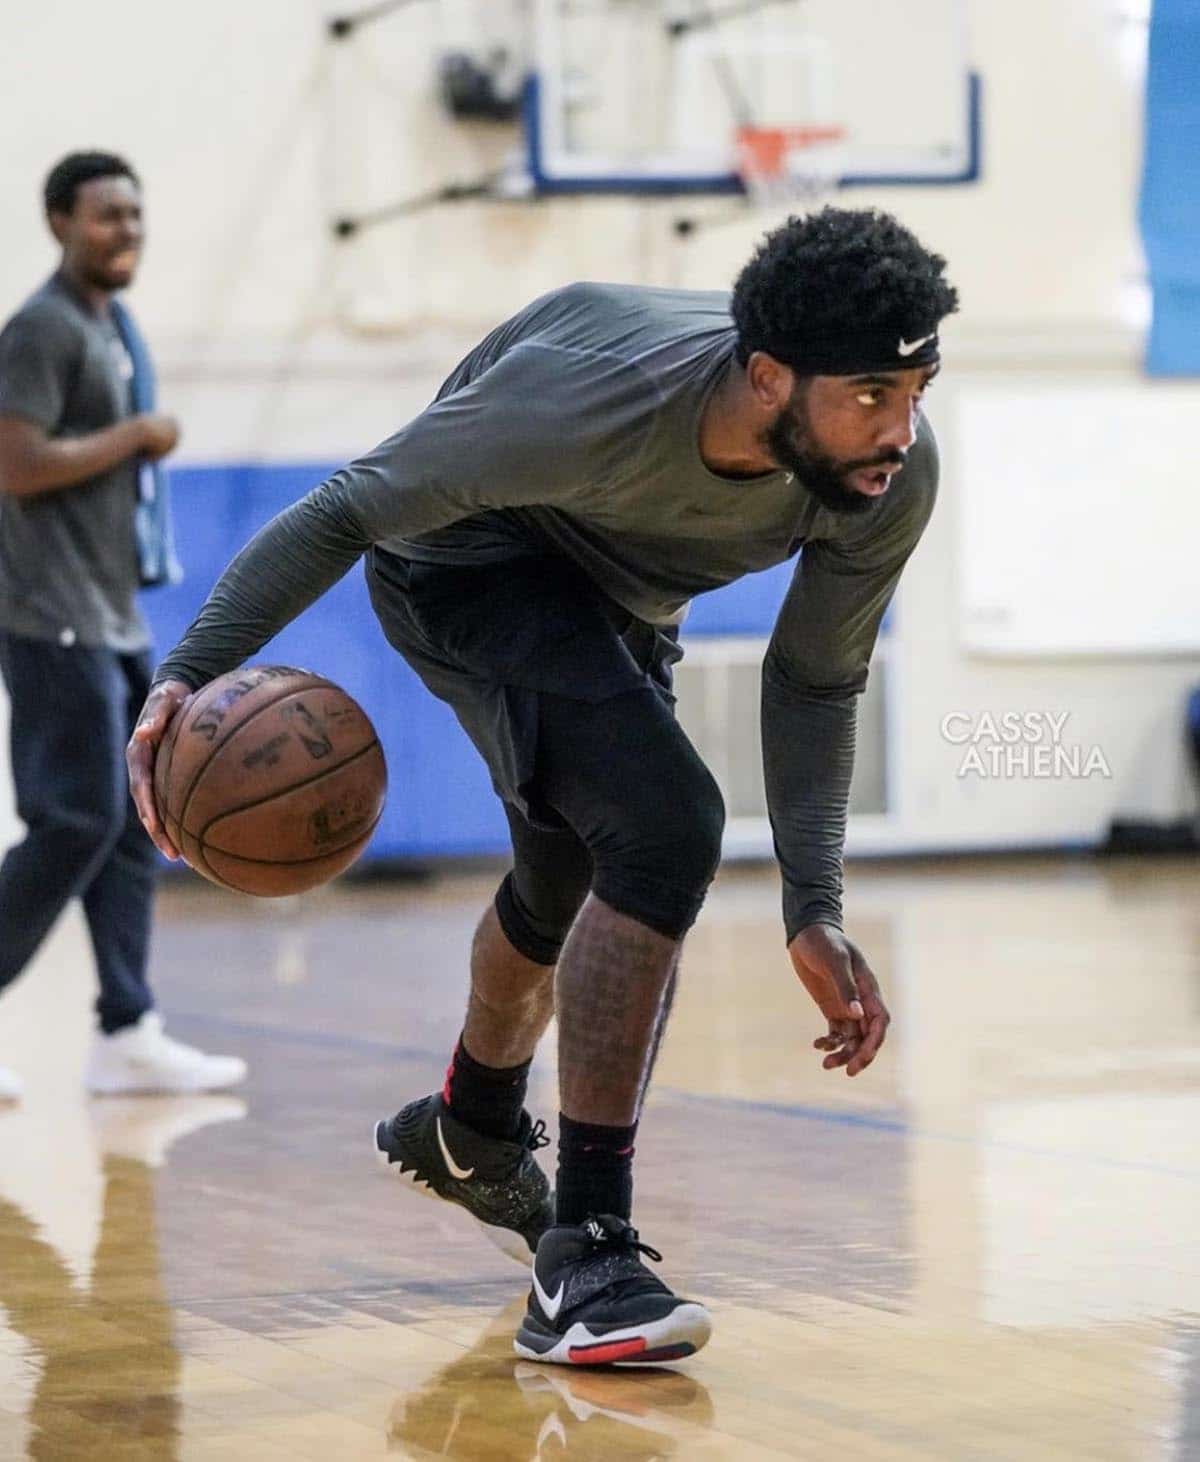 when does the kyrie 6 come out